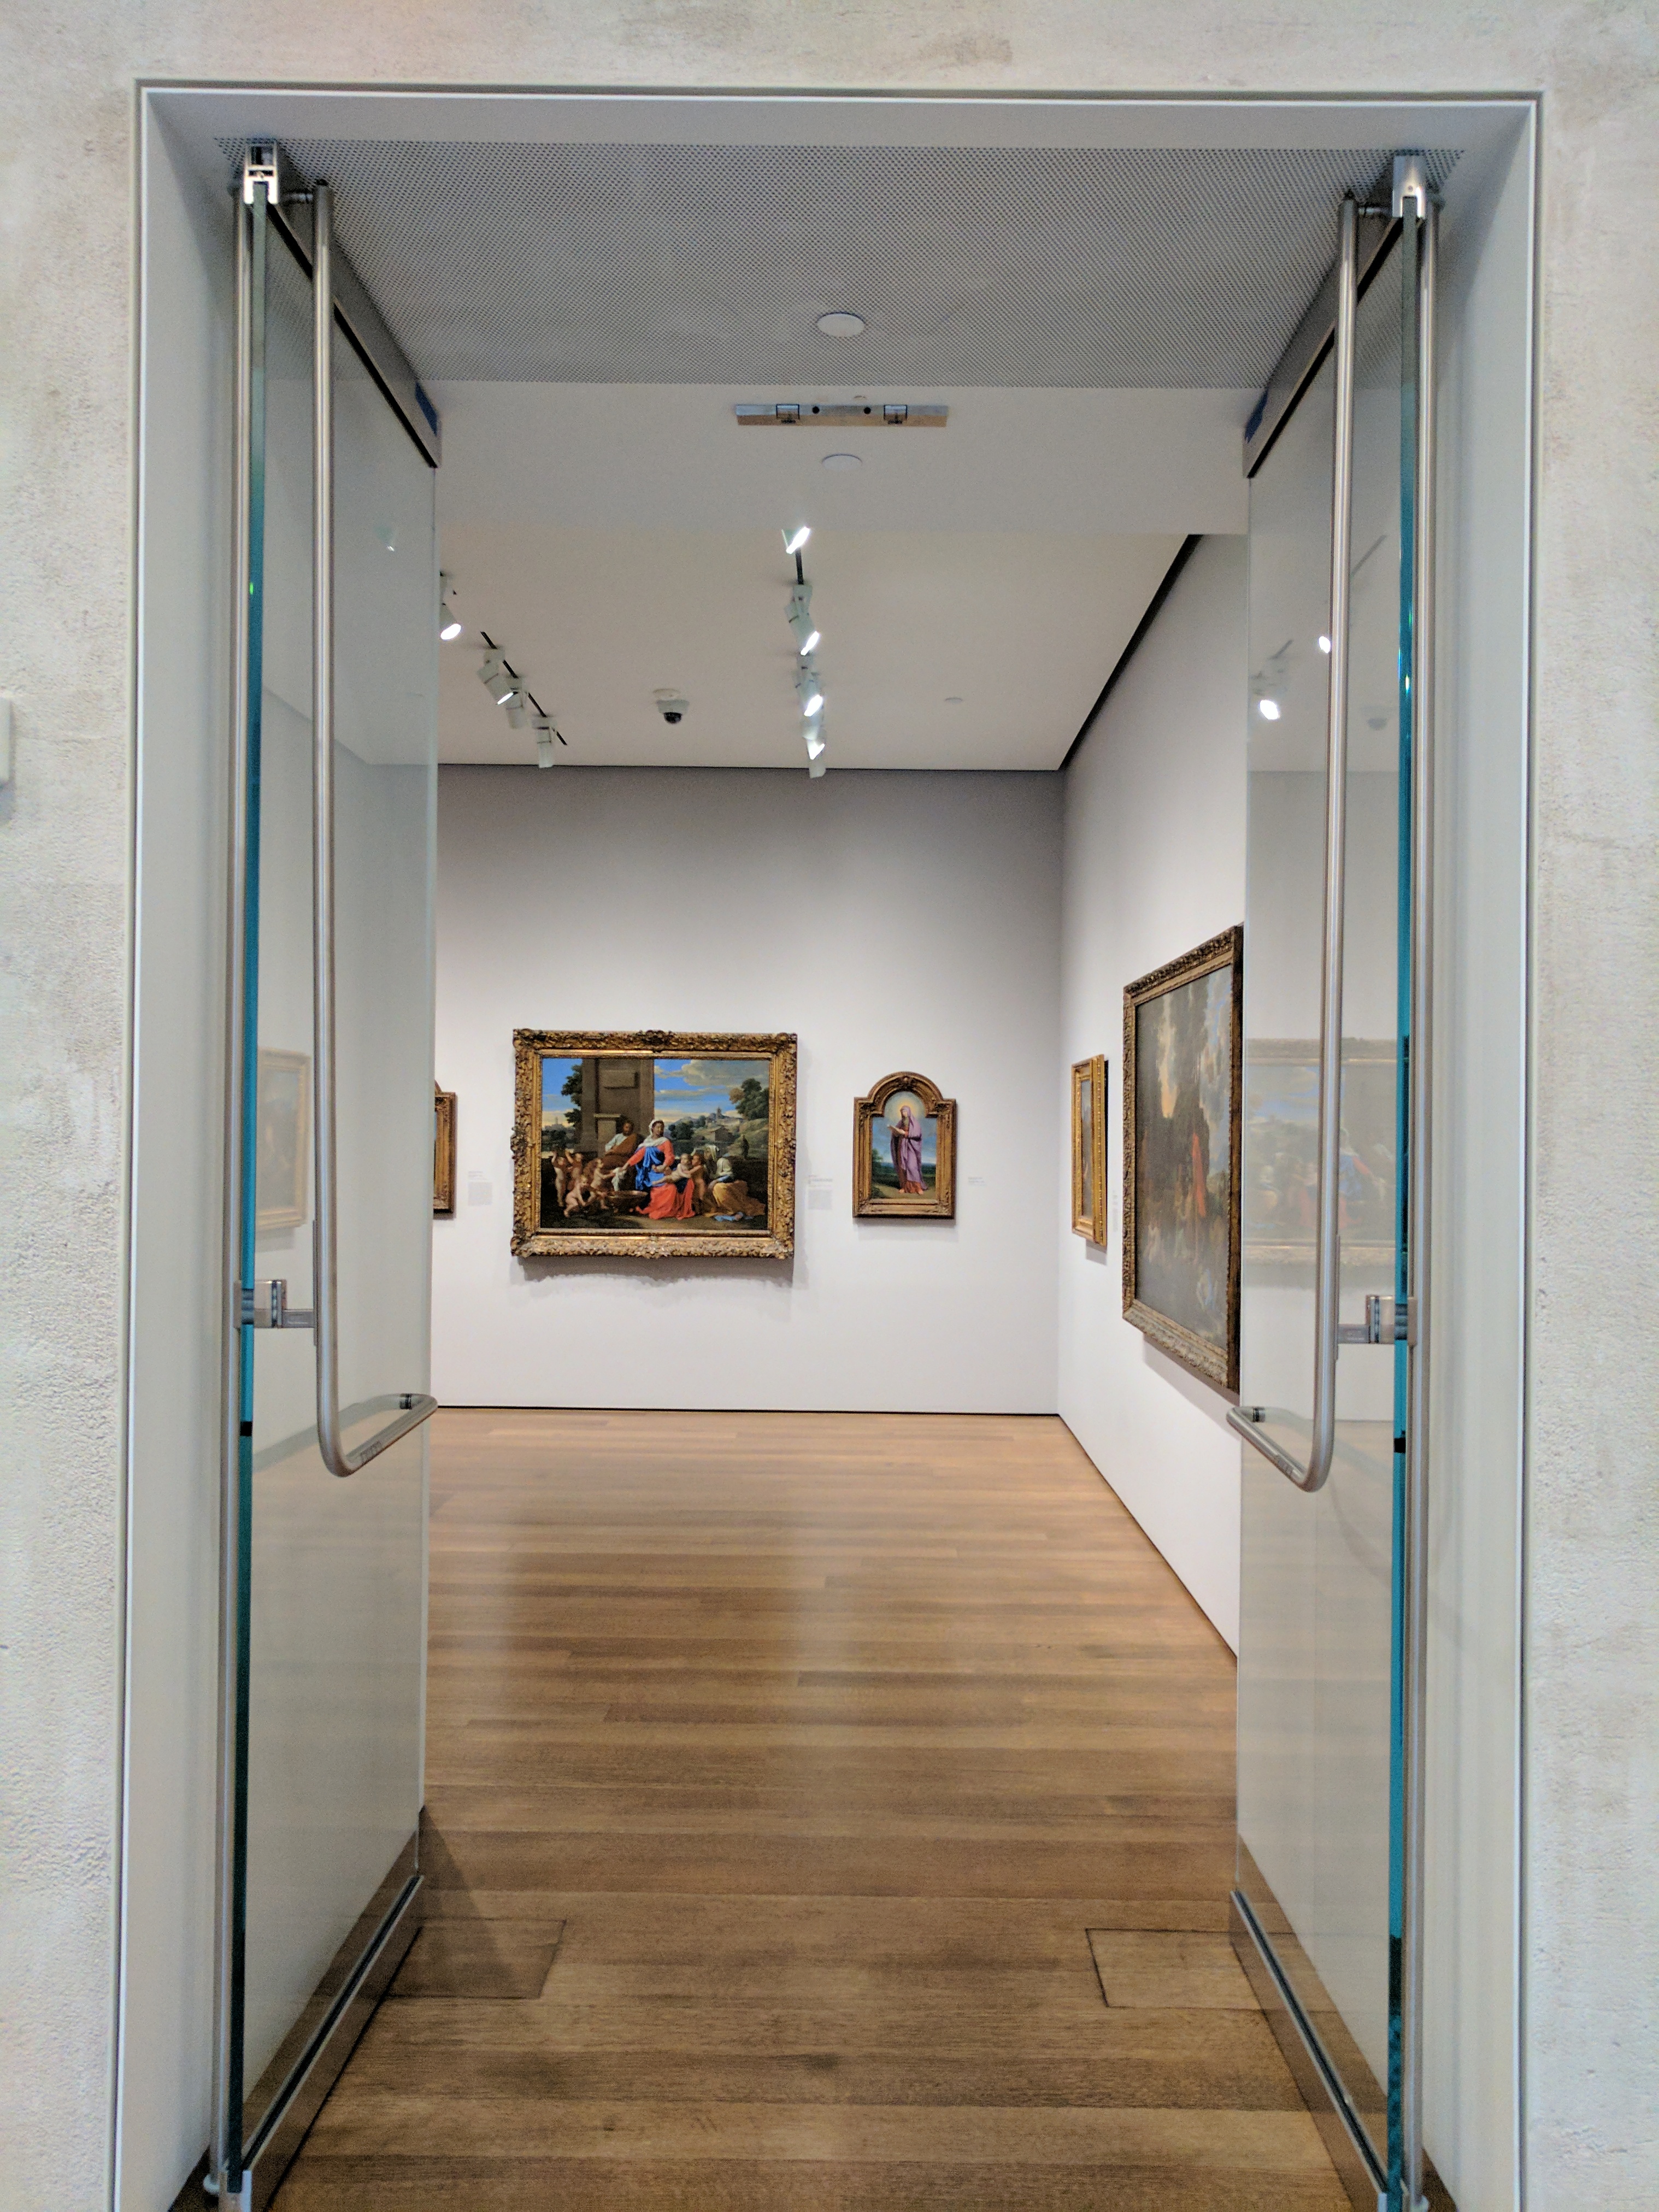 An image of Christian paintings through a door in the Harvard Art Museum.